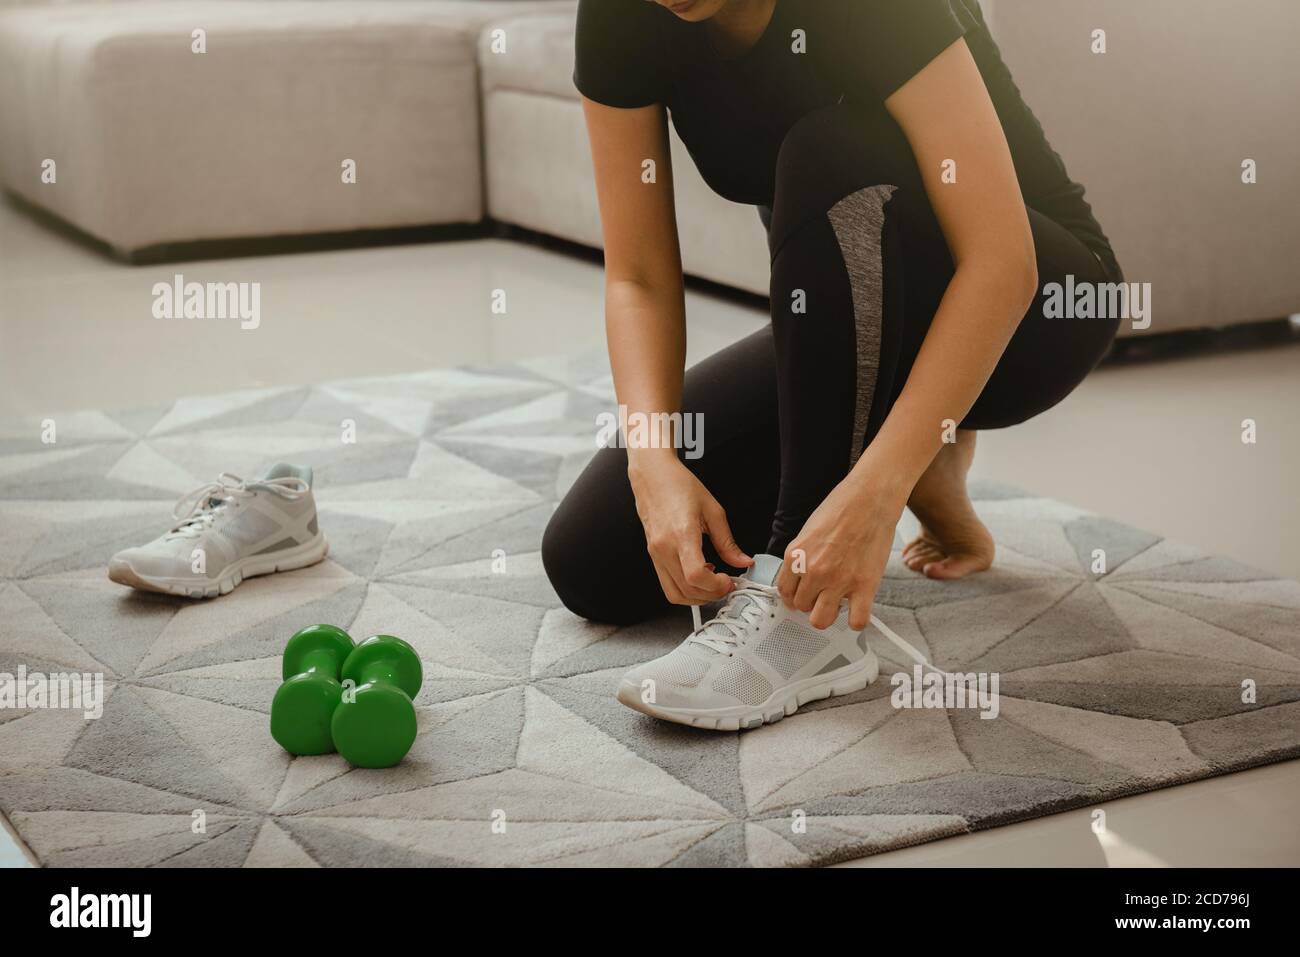 Woman getting ready for workout at home. She is tying shoelace on sneakers. Sport and recreation concept. Stock Photo